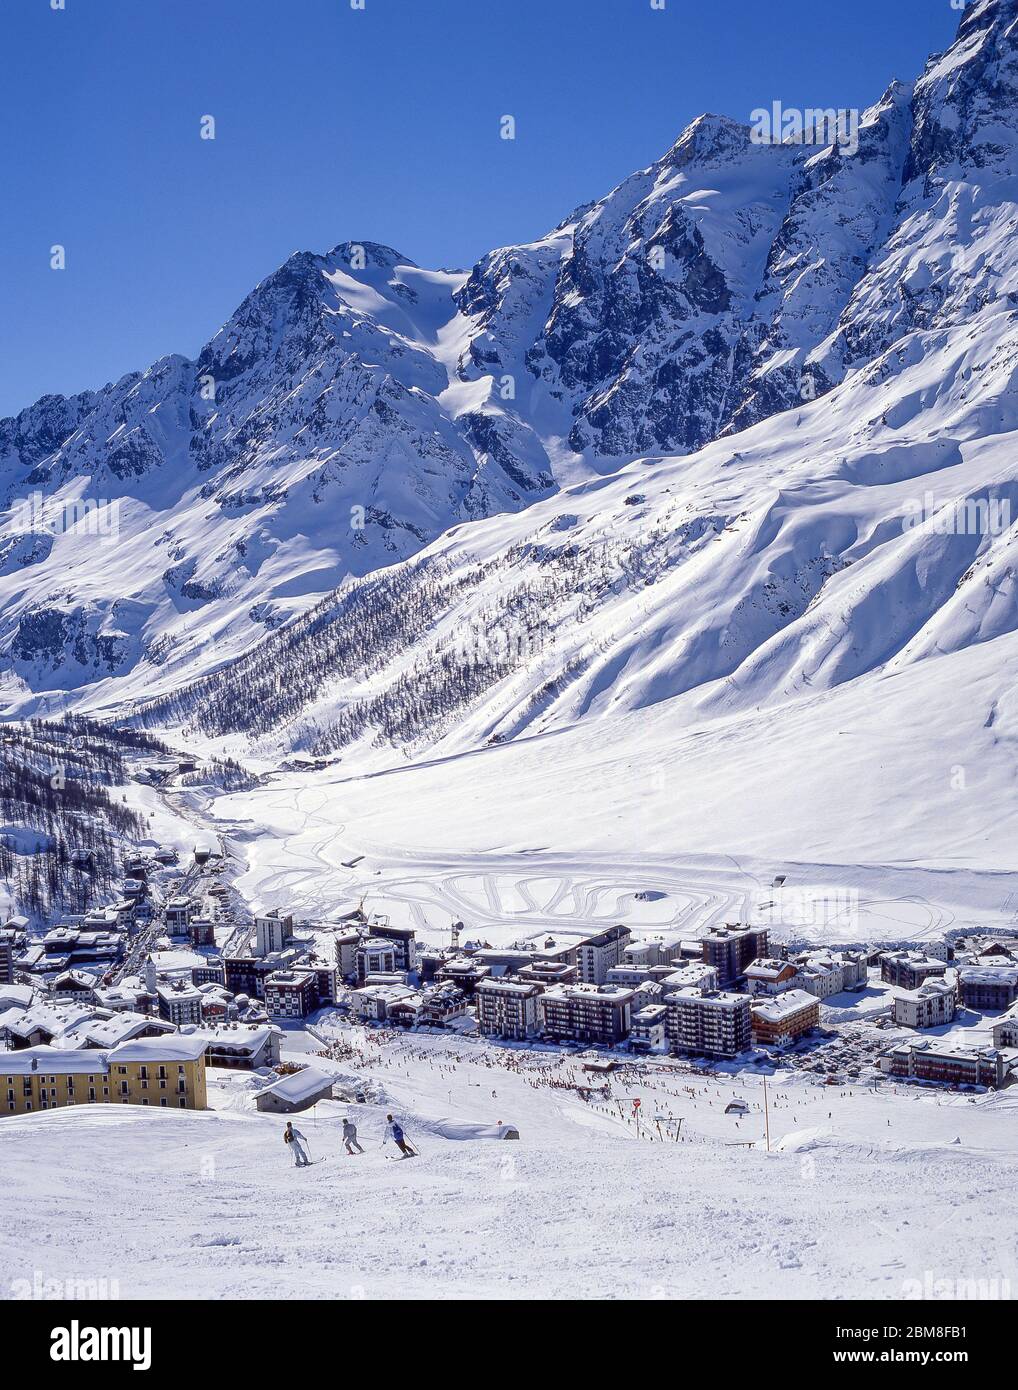 Resort view from piste, Breuil-Cervinia, Aosta Valley, Italy Stock Photo